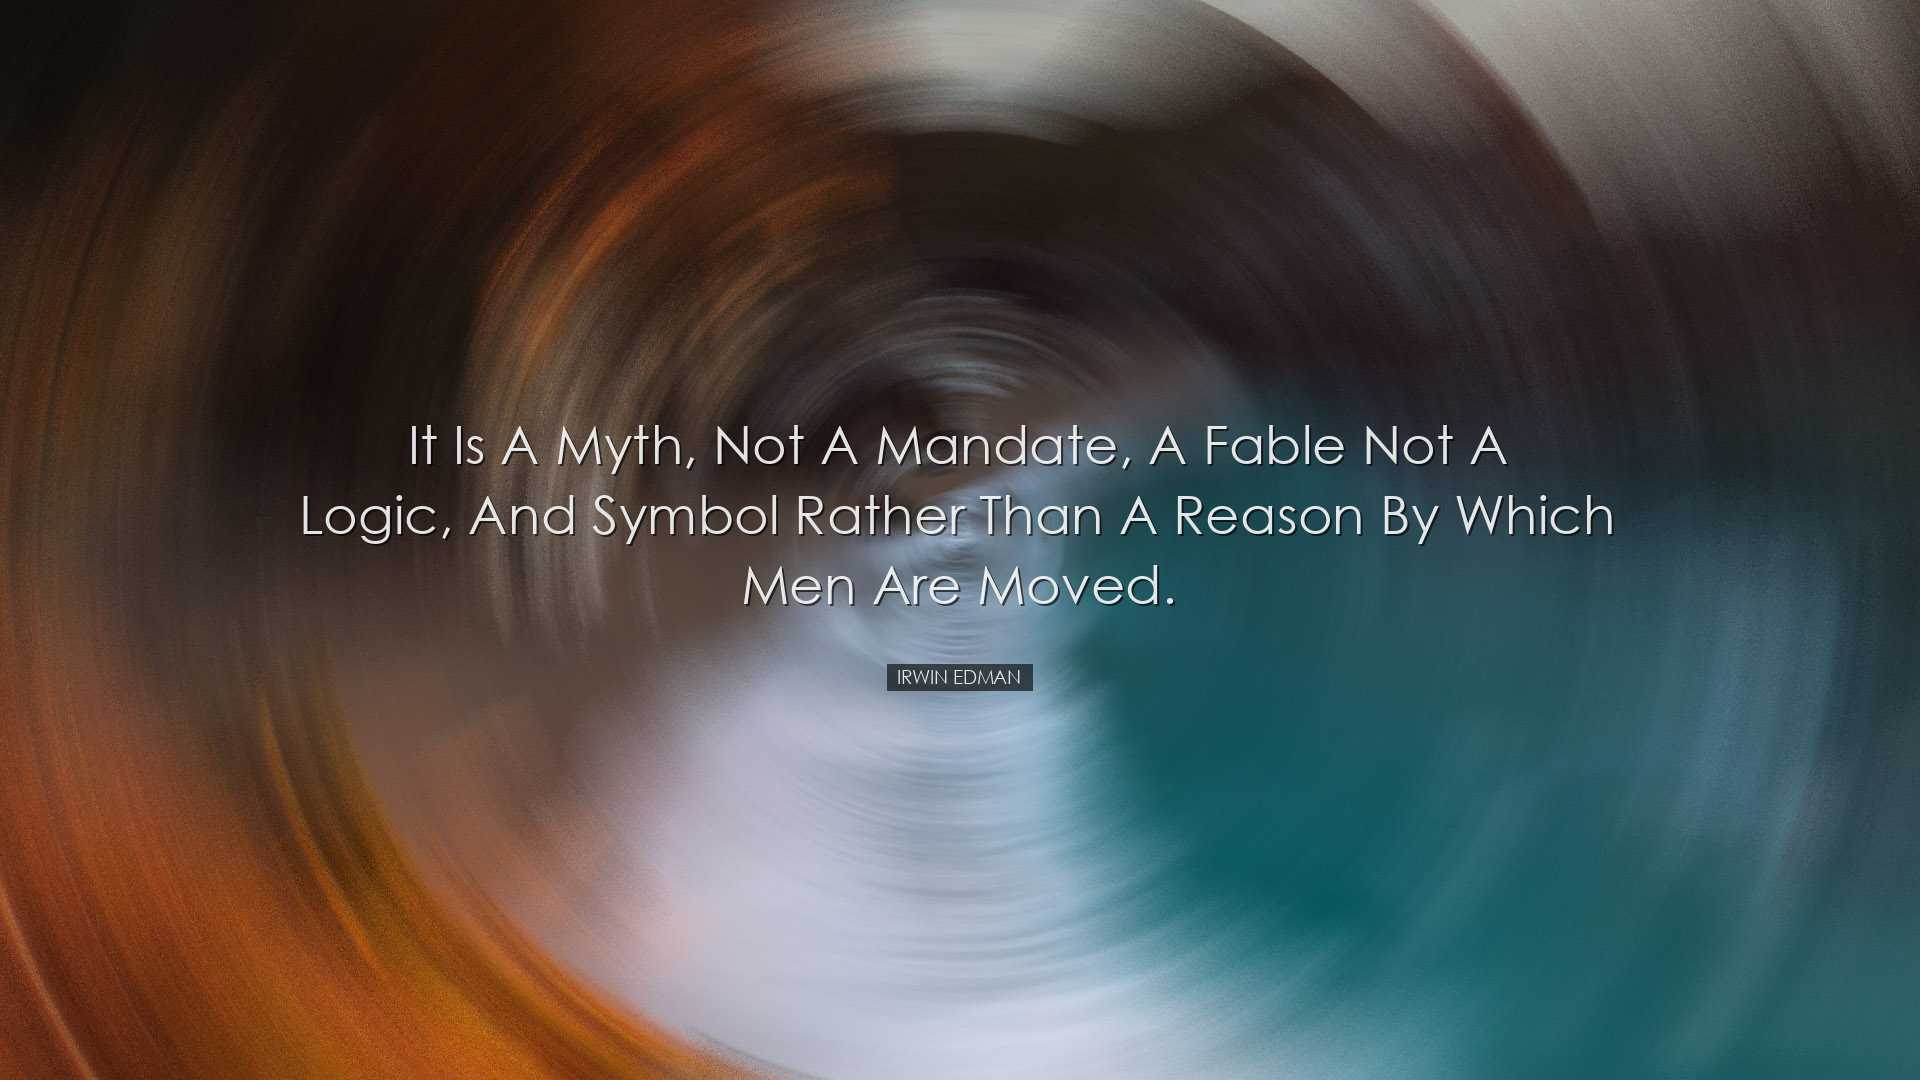 It is a myth, not a mandate, a fable not a logic, and symbol rathe